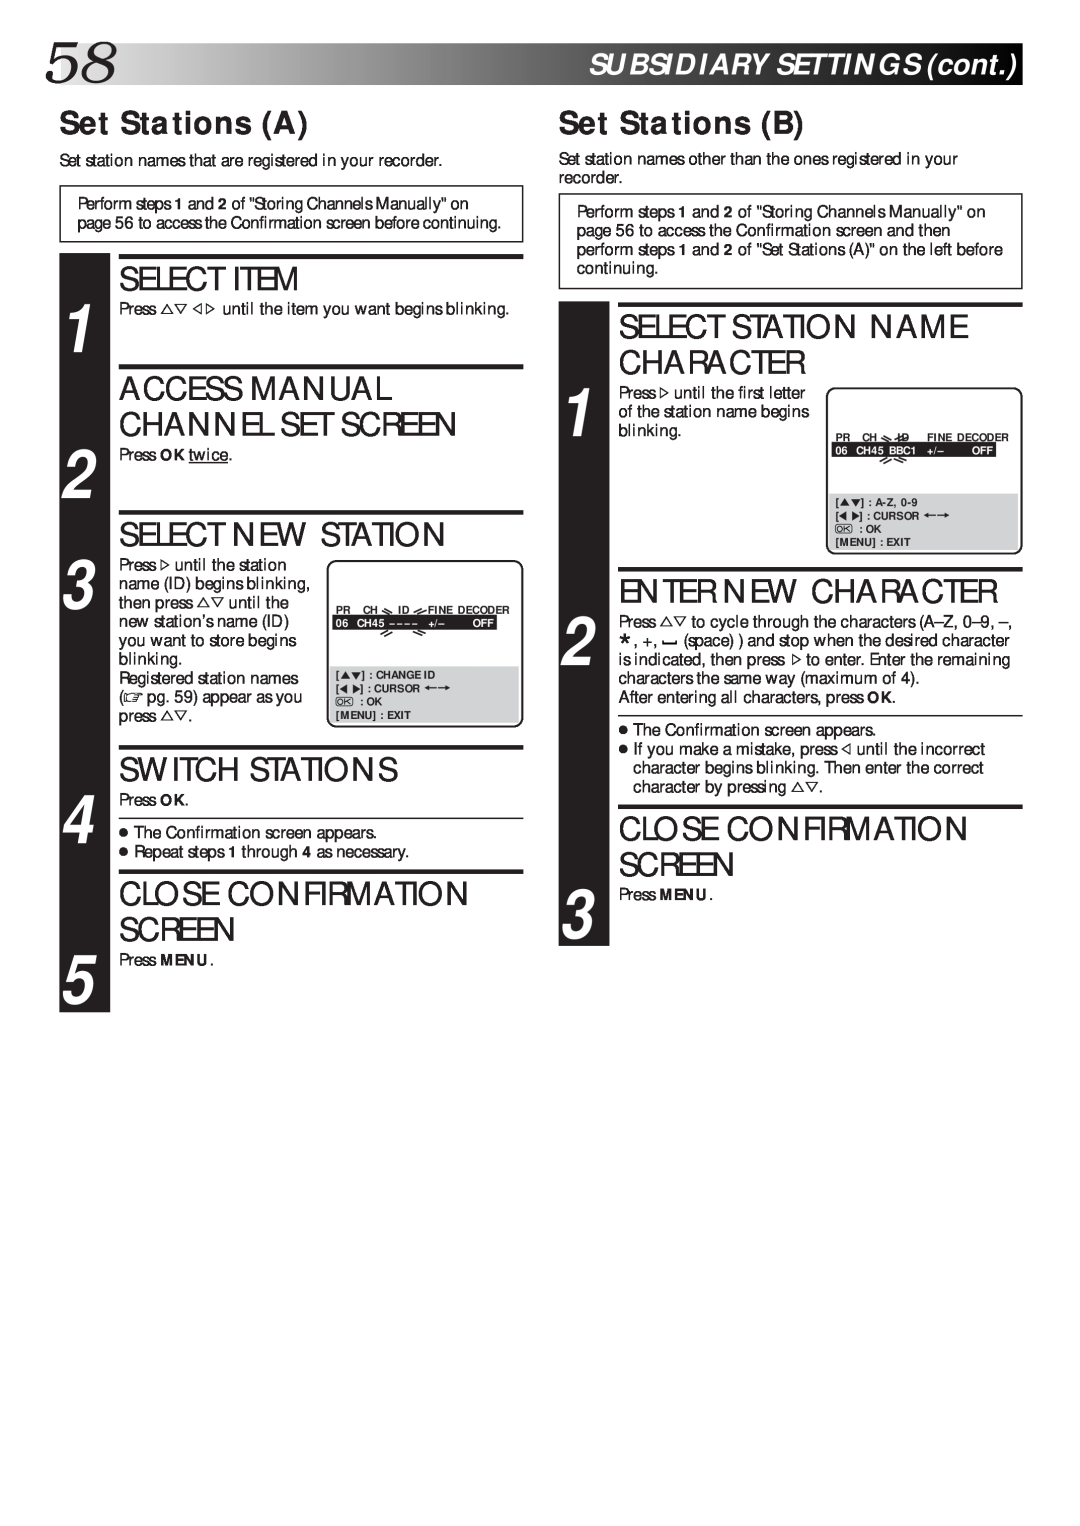 JVC HR-S9600EK Access Manual, Channel Set Screen, Select New Station, Switch Stations, Close Confirmation, Set Stations A 